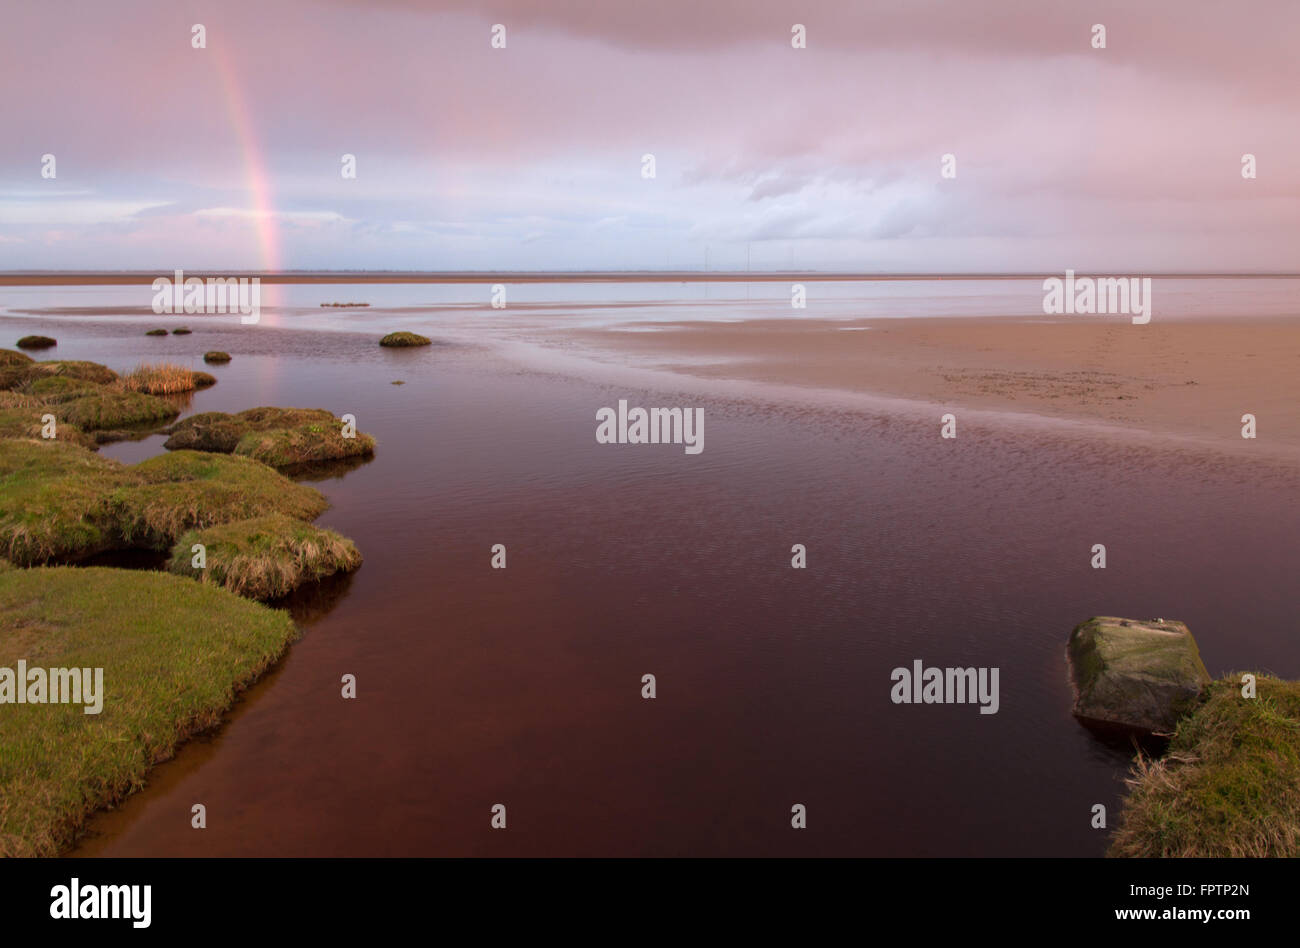 Solway Firth, Scotland. A rainbow at sunset on the Solway Firth saltmarsh and beach, near the village of Powfoot. Stock Photo